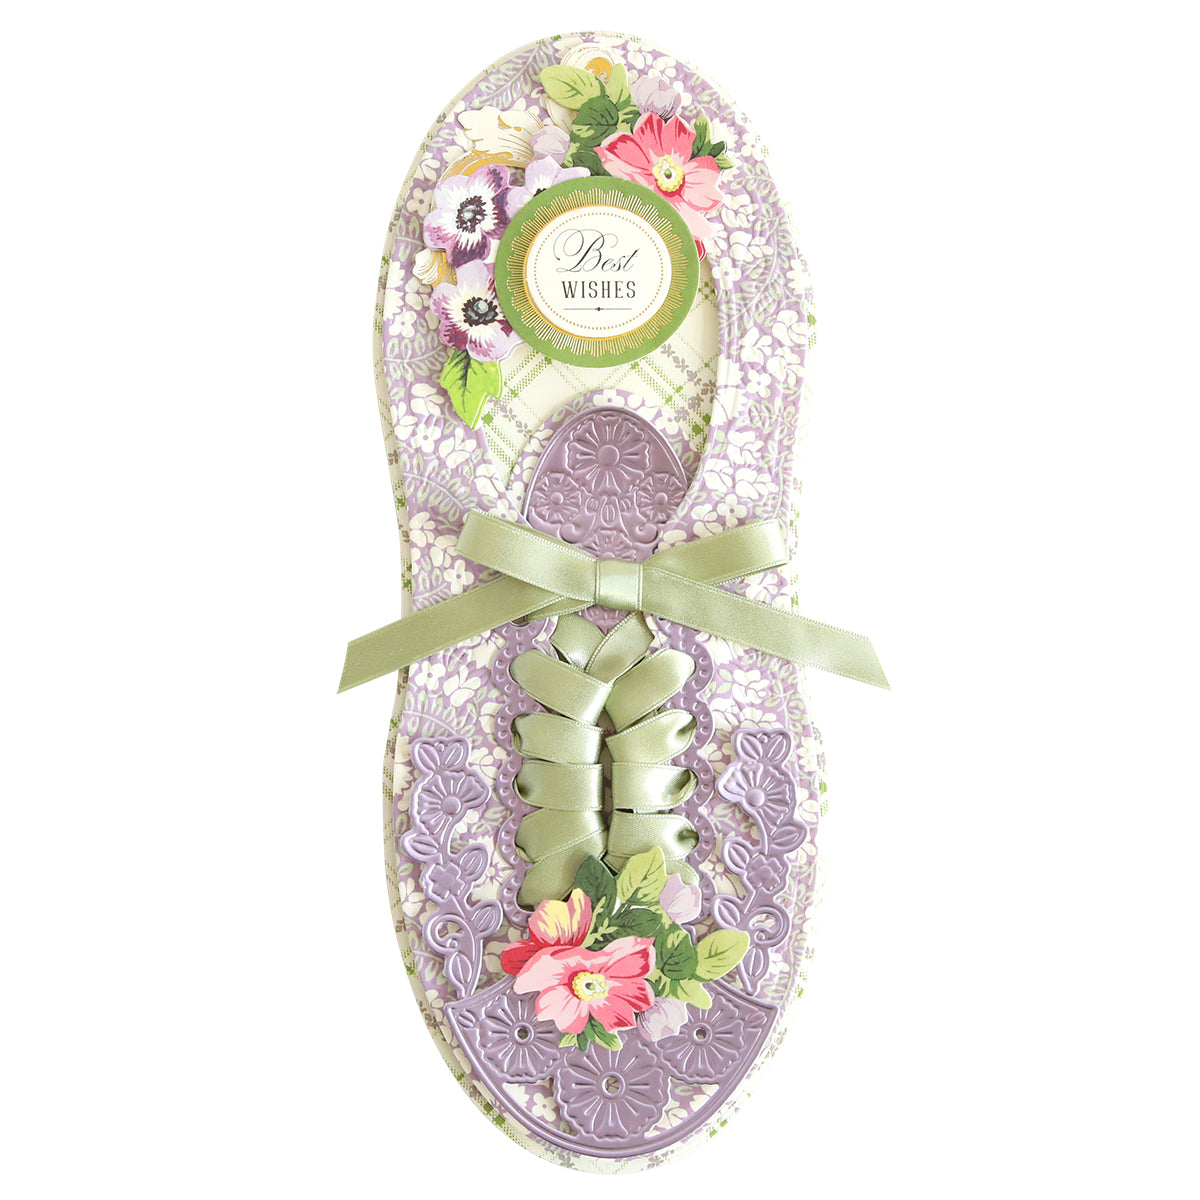 A Paper Sneaker Dies-shaped, intricate floral greeting card with pastel colors, featuring flower patterns and a "Best Wishes" message on the front. Perfect for the shoe lover, it includes a green ribbon laced at the center.